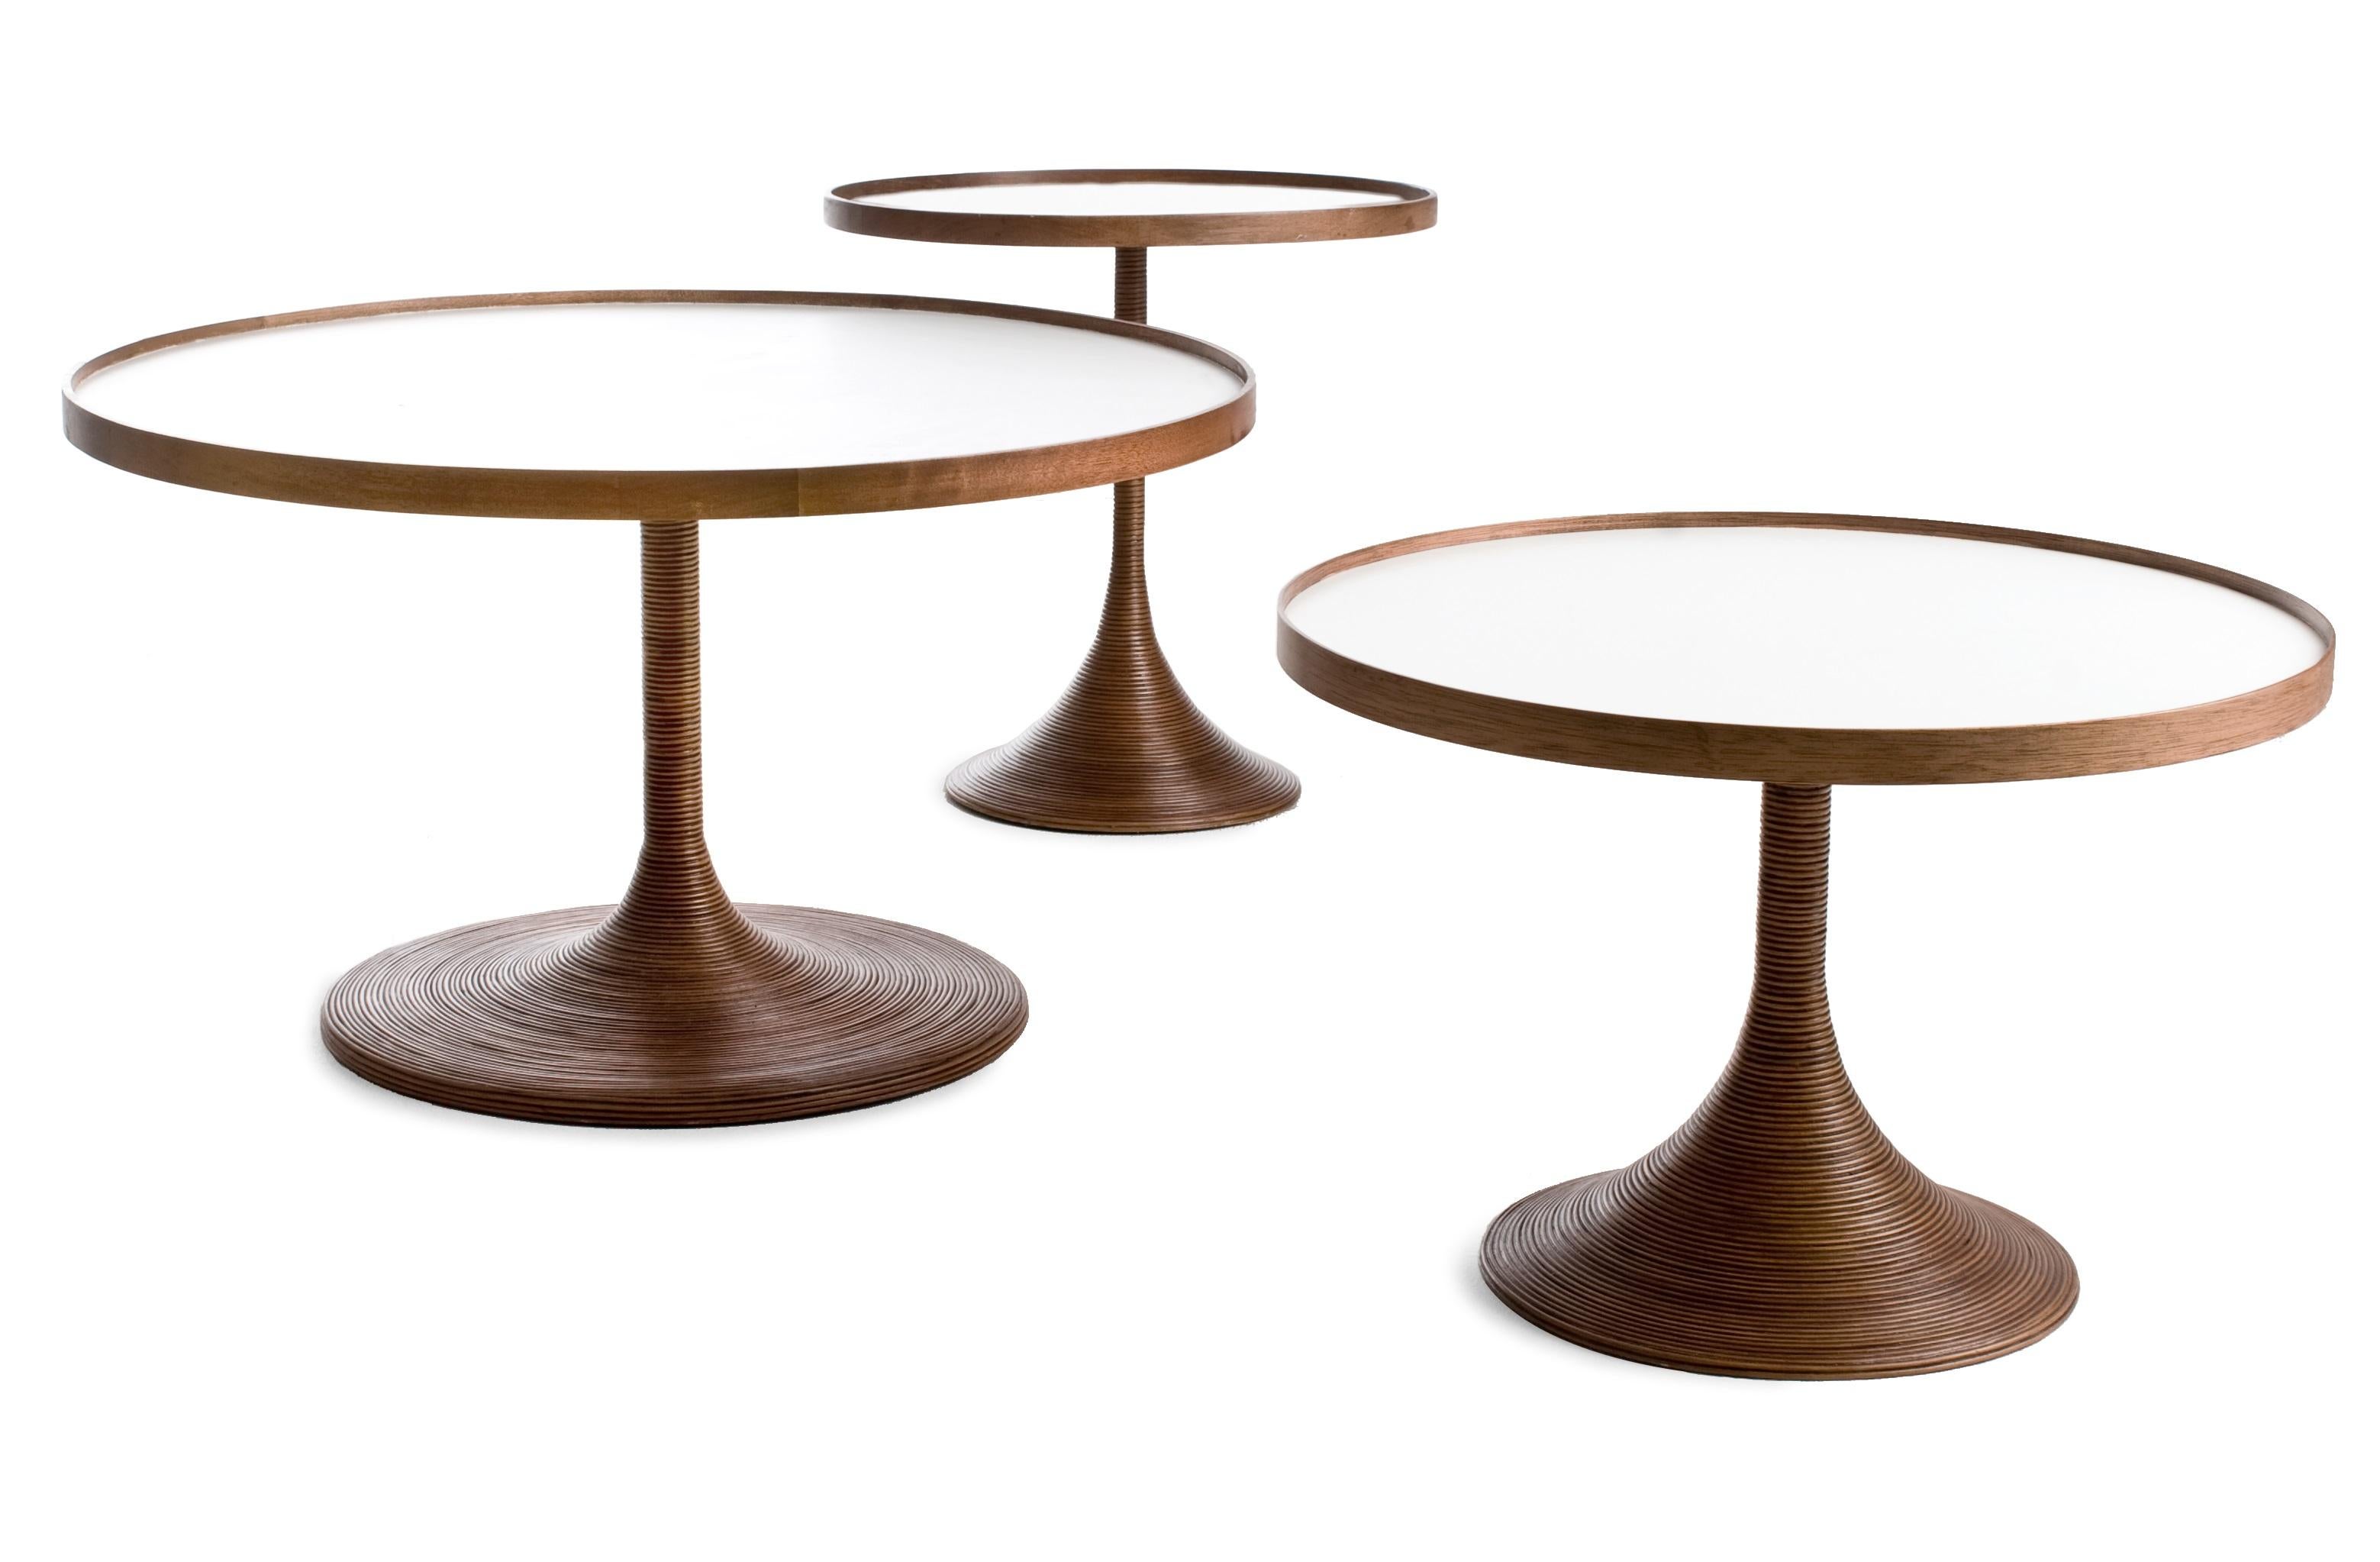 Medium La Luna table by Kenneth Cobonpue
Materials: Rattan, High-pressure laminate, maple. 
Also available in other colors. 
Dimensions: Diameter 60 cm x Height 40 cm

La Luna’s quiet sophistication is defined by a soft, round shape that feels